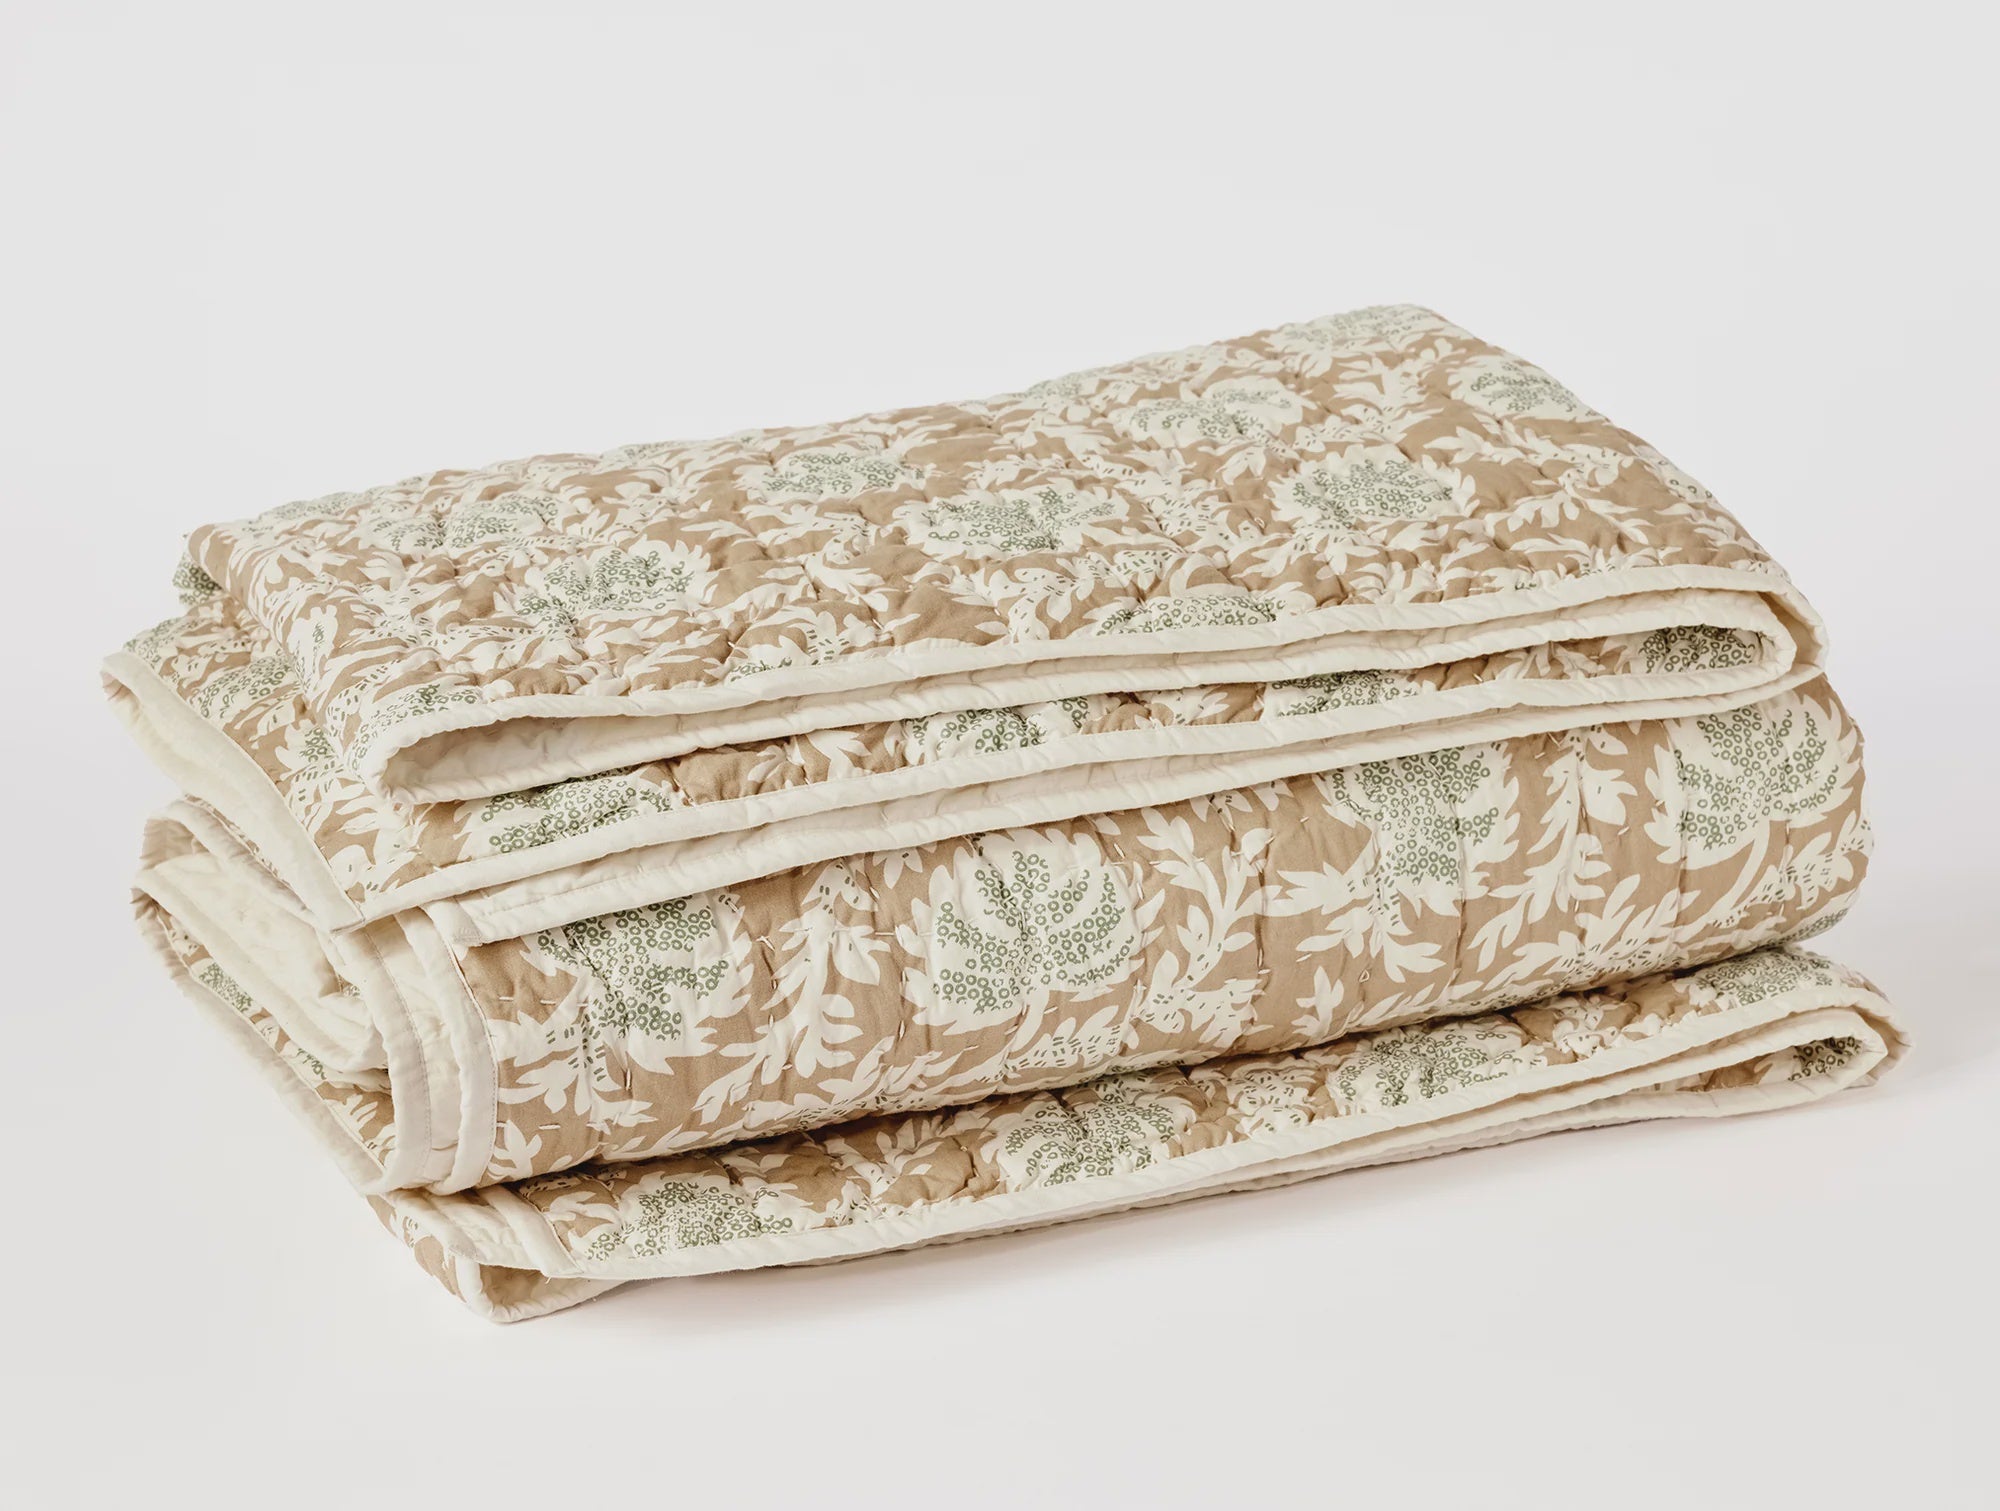 A folded Robles Handstitched Org Quilt with a floral pattern in shades of beige and green, neatly arranged against a plain white background, perfect for the cozy interior of a Scottsdale, Arizona bungalow by Coyuchi Inc.